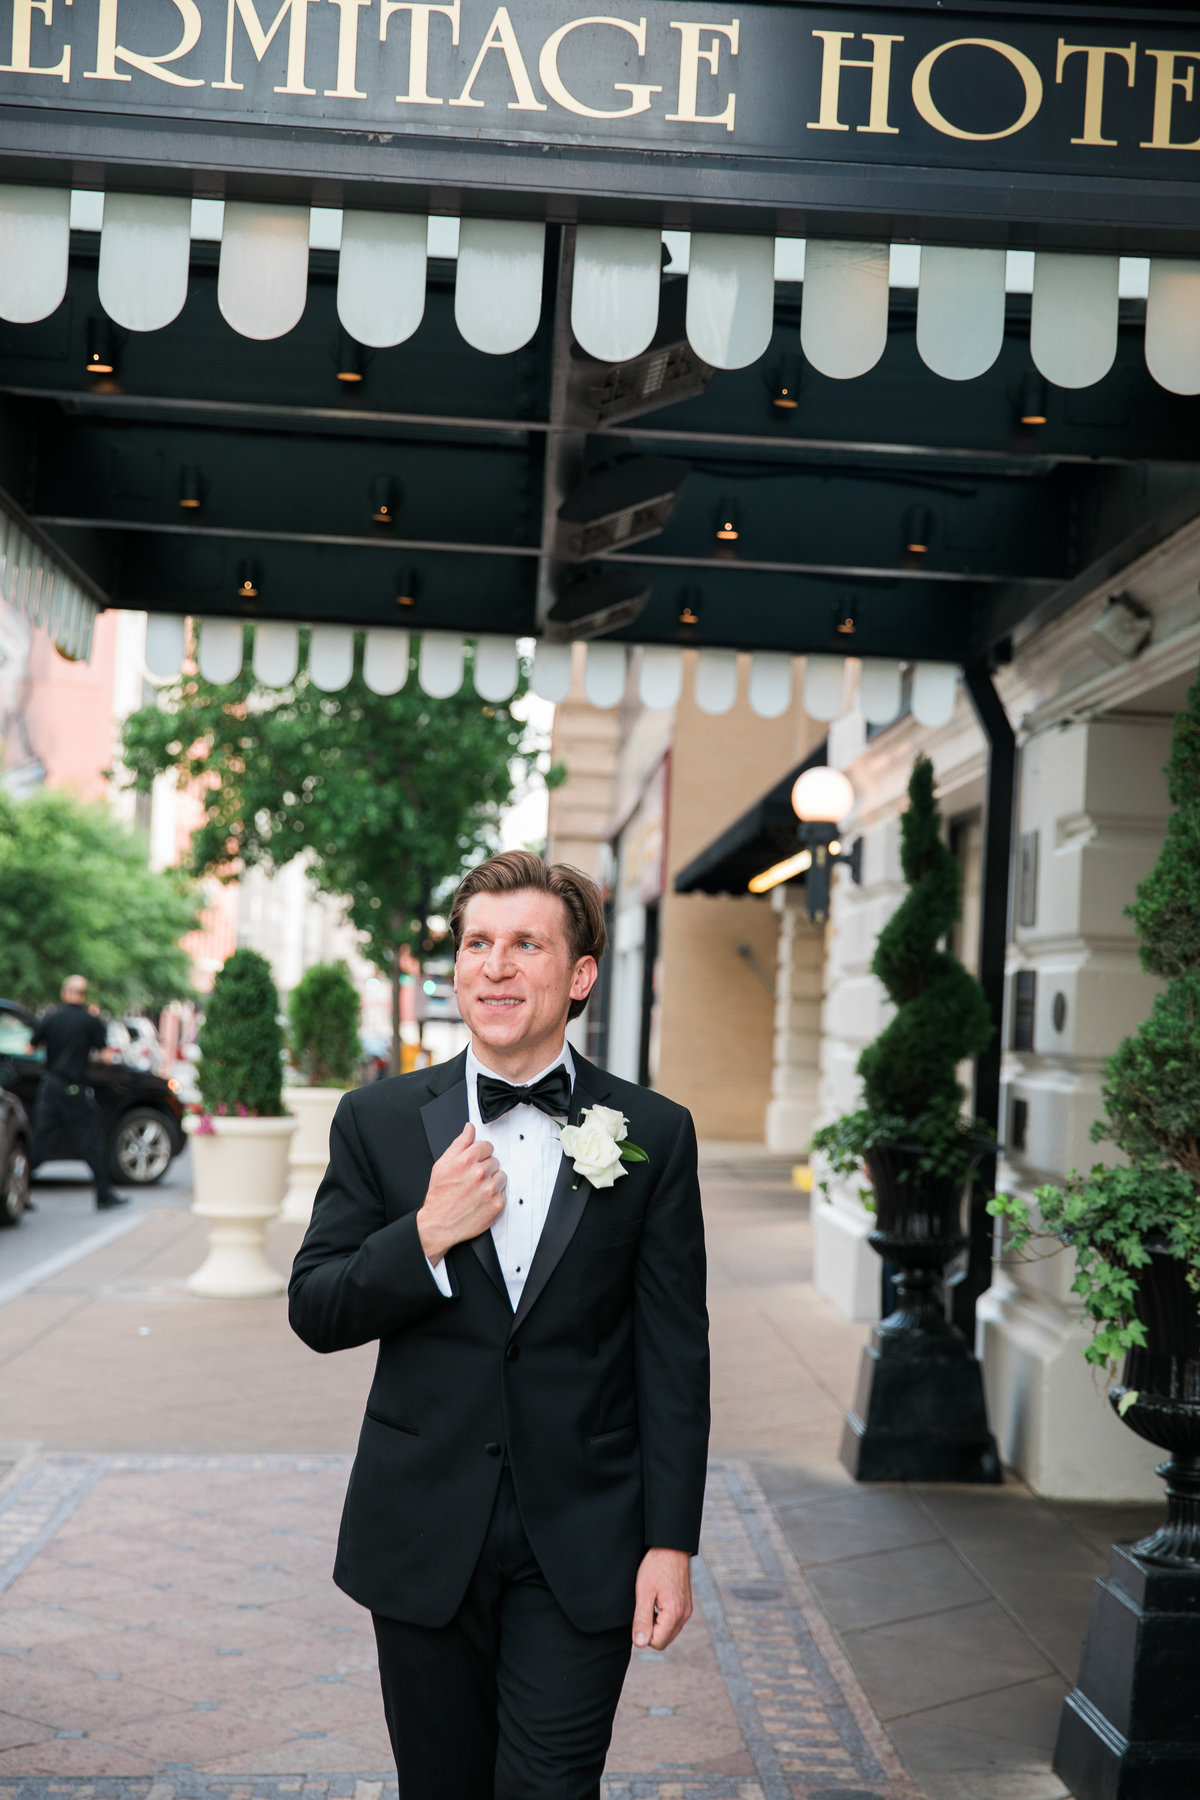 Groom standing in front of the Hermitage Hotel in Nashville.